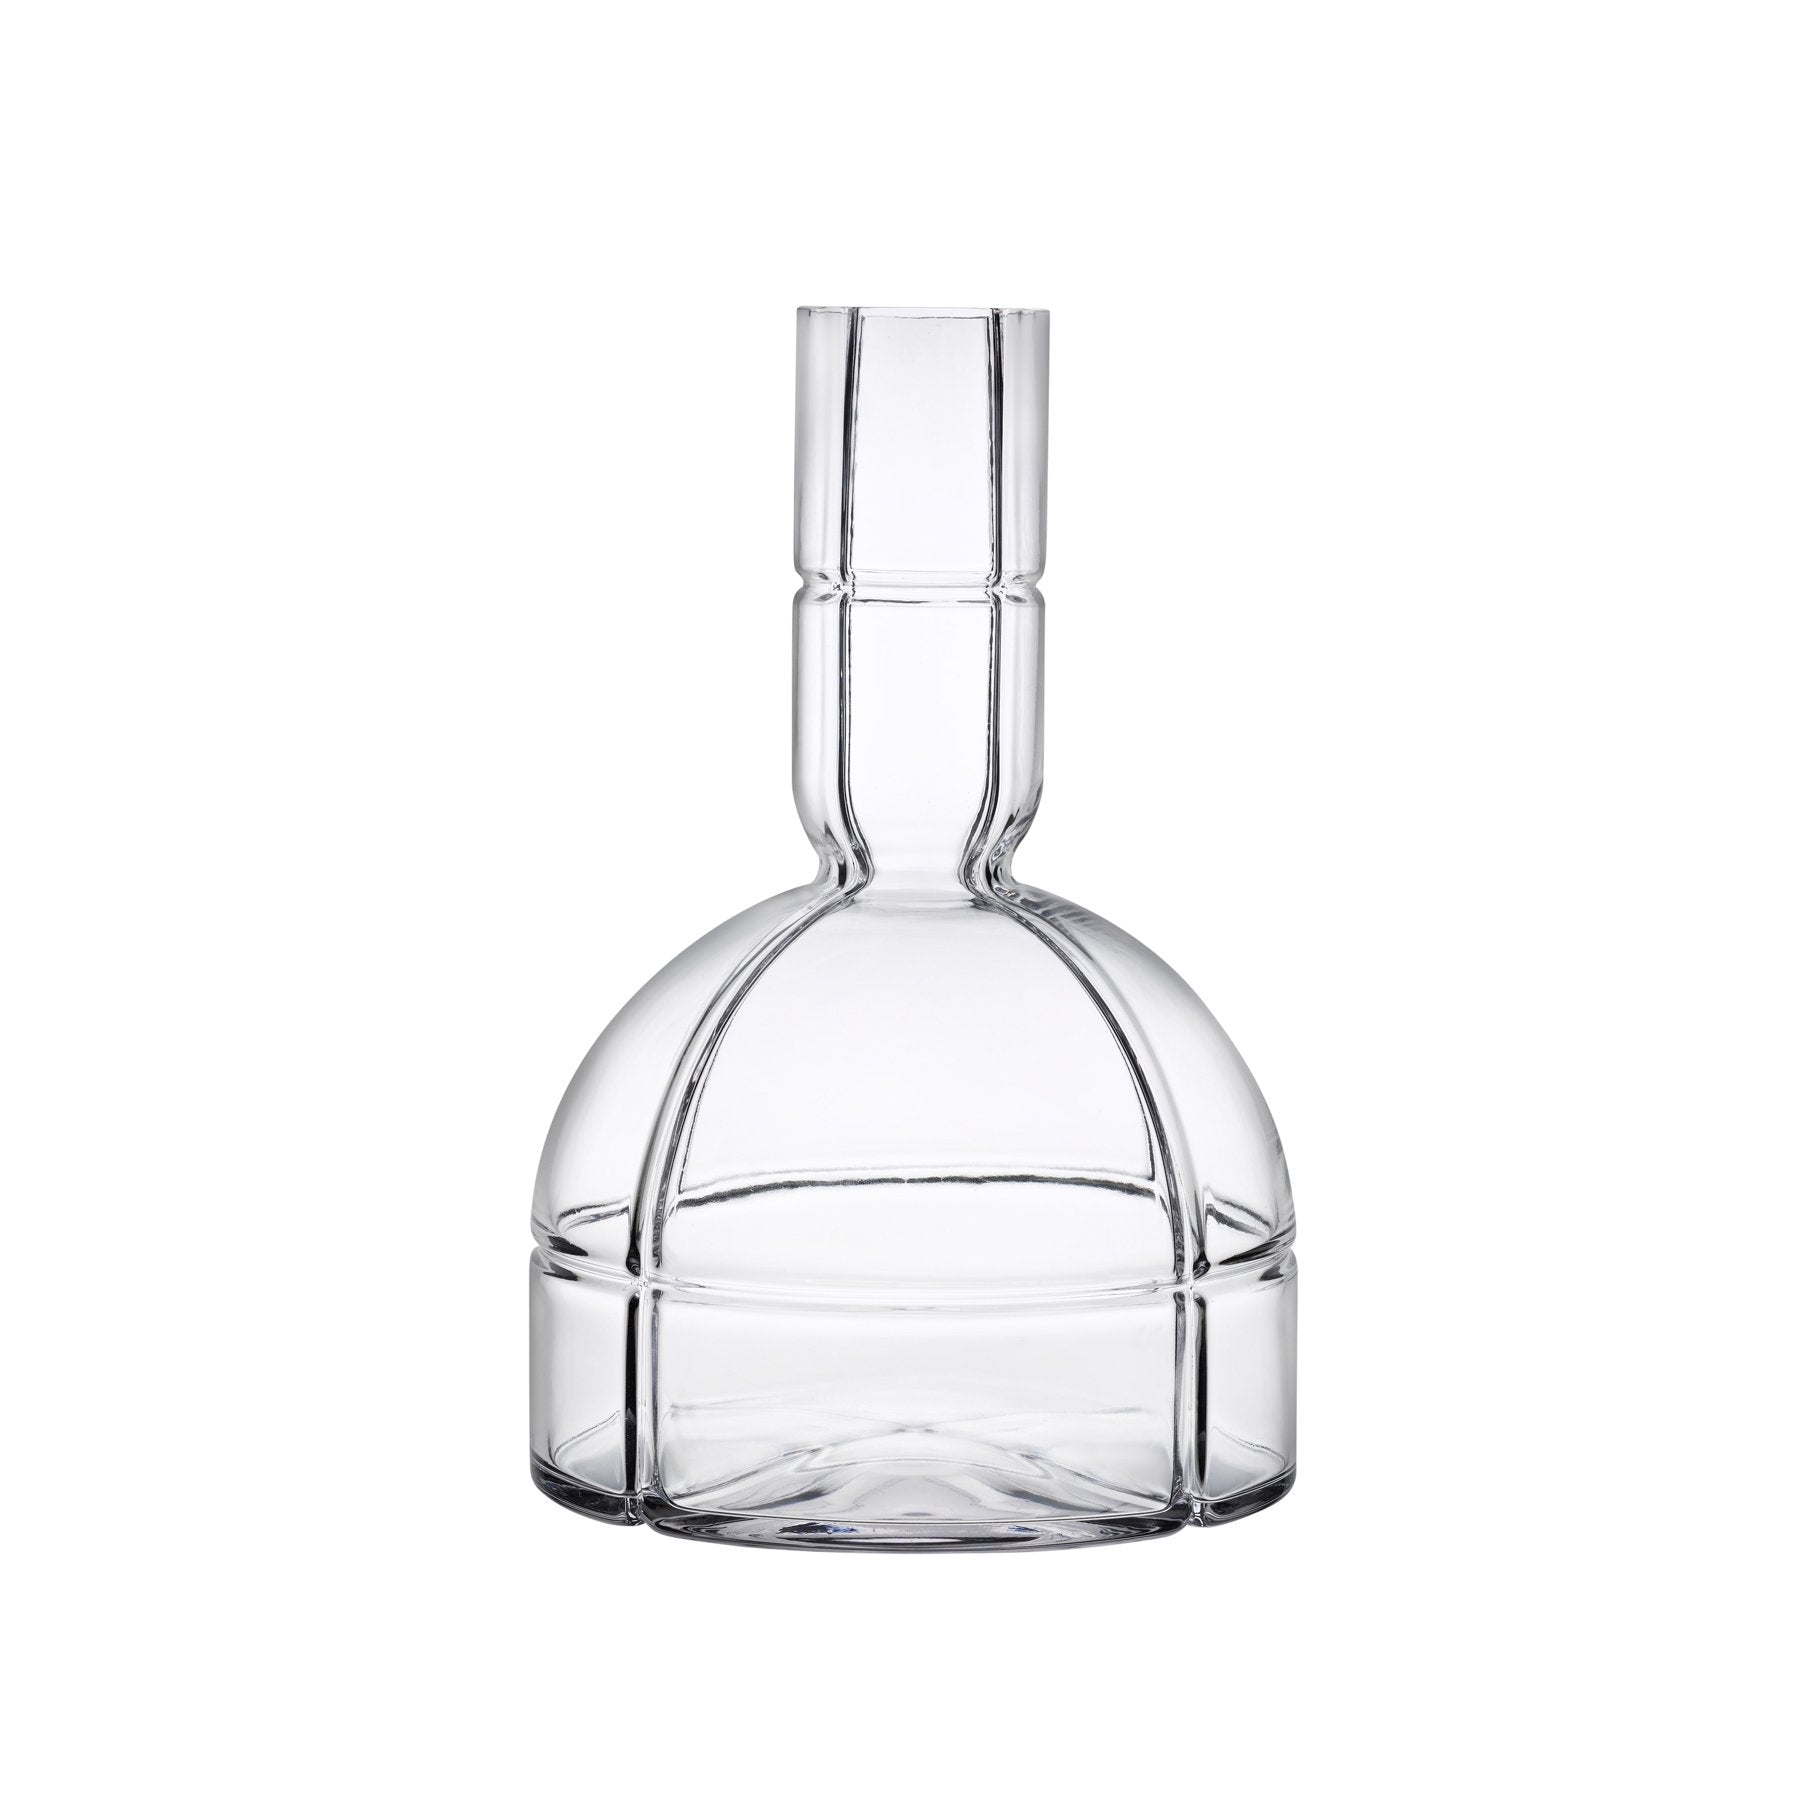 O2 wine carafe by nude at adorn.house